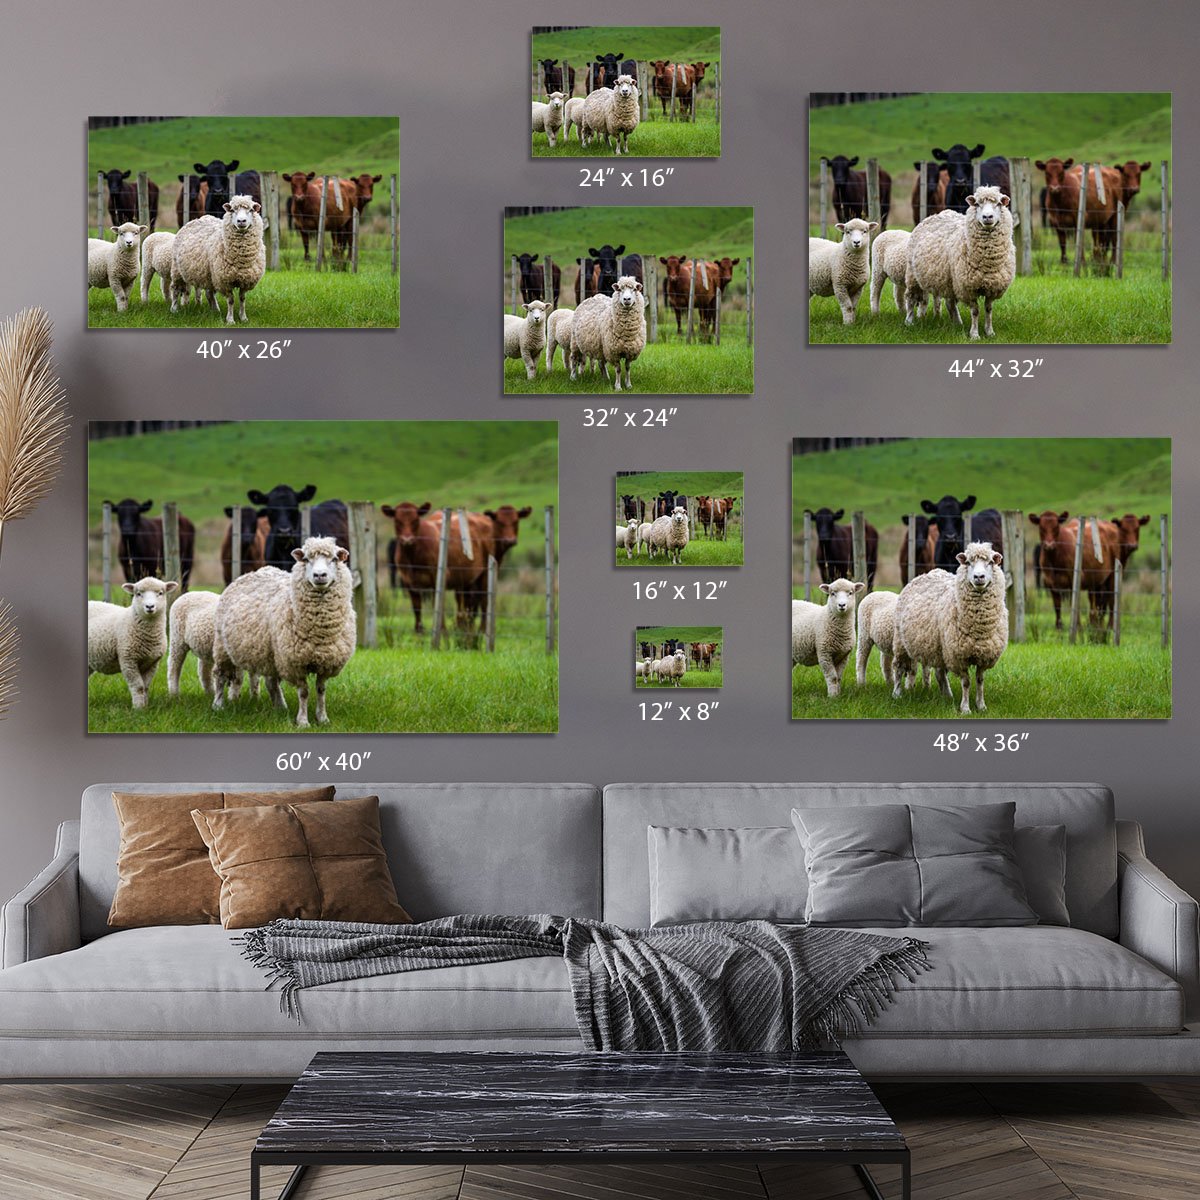 Sheep and cows Canvas Print or Poster